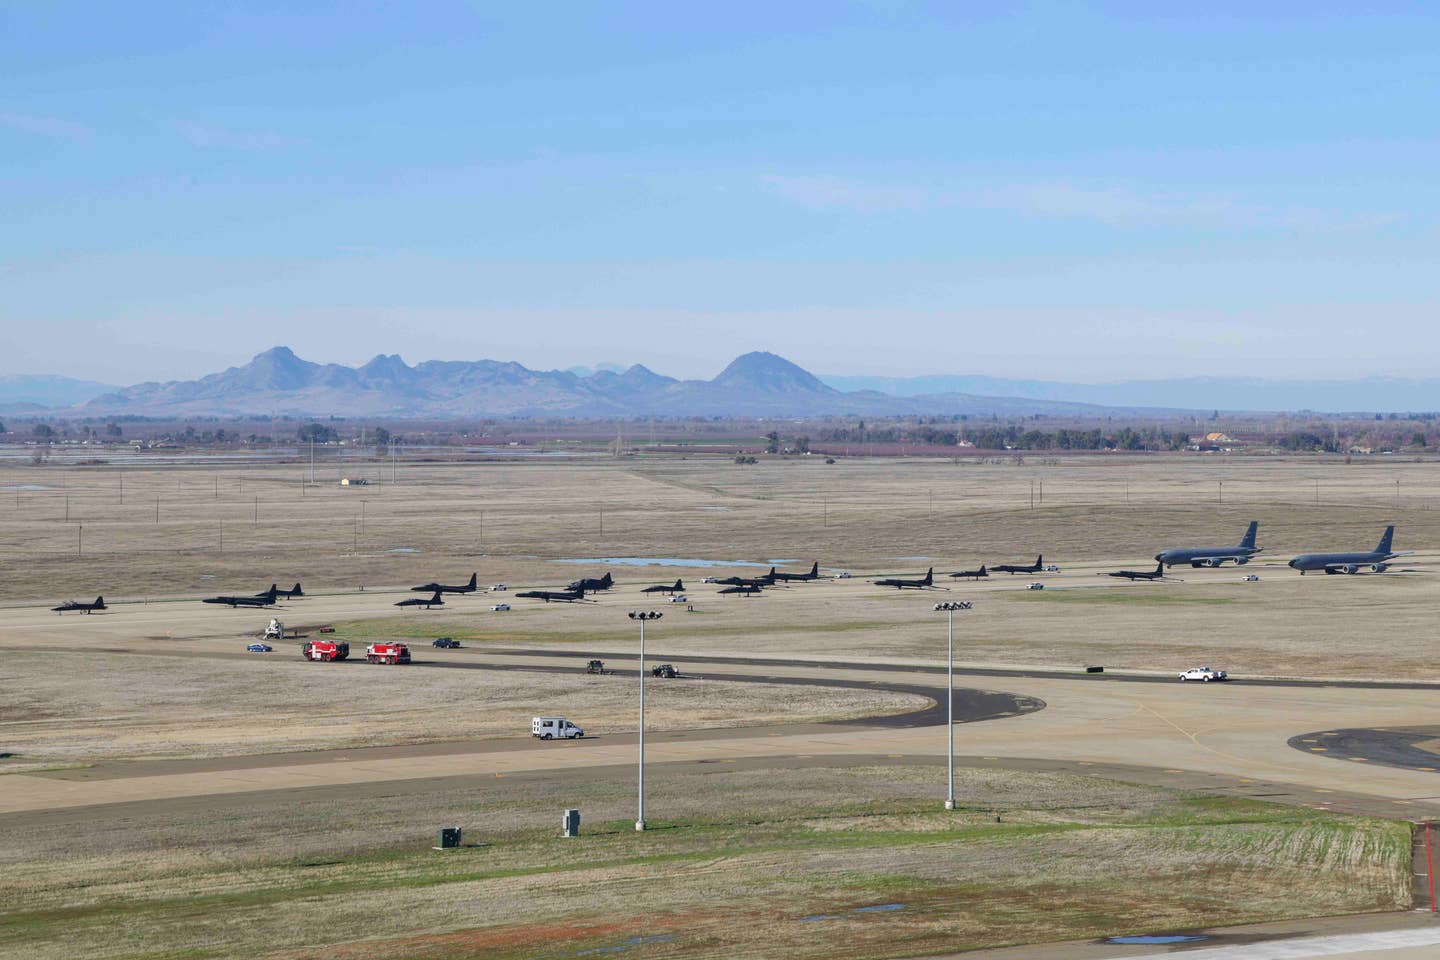 U.S. Air Force T-38 Talons from the 1st Reconnaissance Squadron, U-2 Dragon Ladies and chase cars from the 99th Reconnaissance Squadron, and KC-135R Stratotankers from the 940th Air Refueling Wing conduct an elephant walk on Beale Air Force Base, California, Jan. 4, 2023. The elephant walk showcased a display of joint airpower between the 9th Reconnaissance Wing and 940th hosted at Beale. (U.S. Air Force photo by Staff Sgt. Frederick A. Brown)